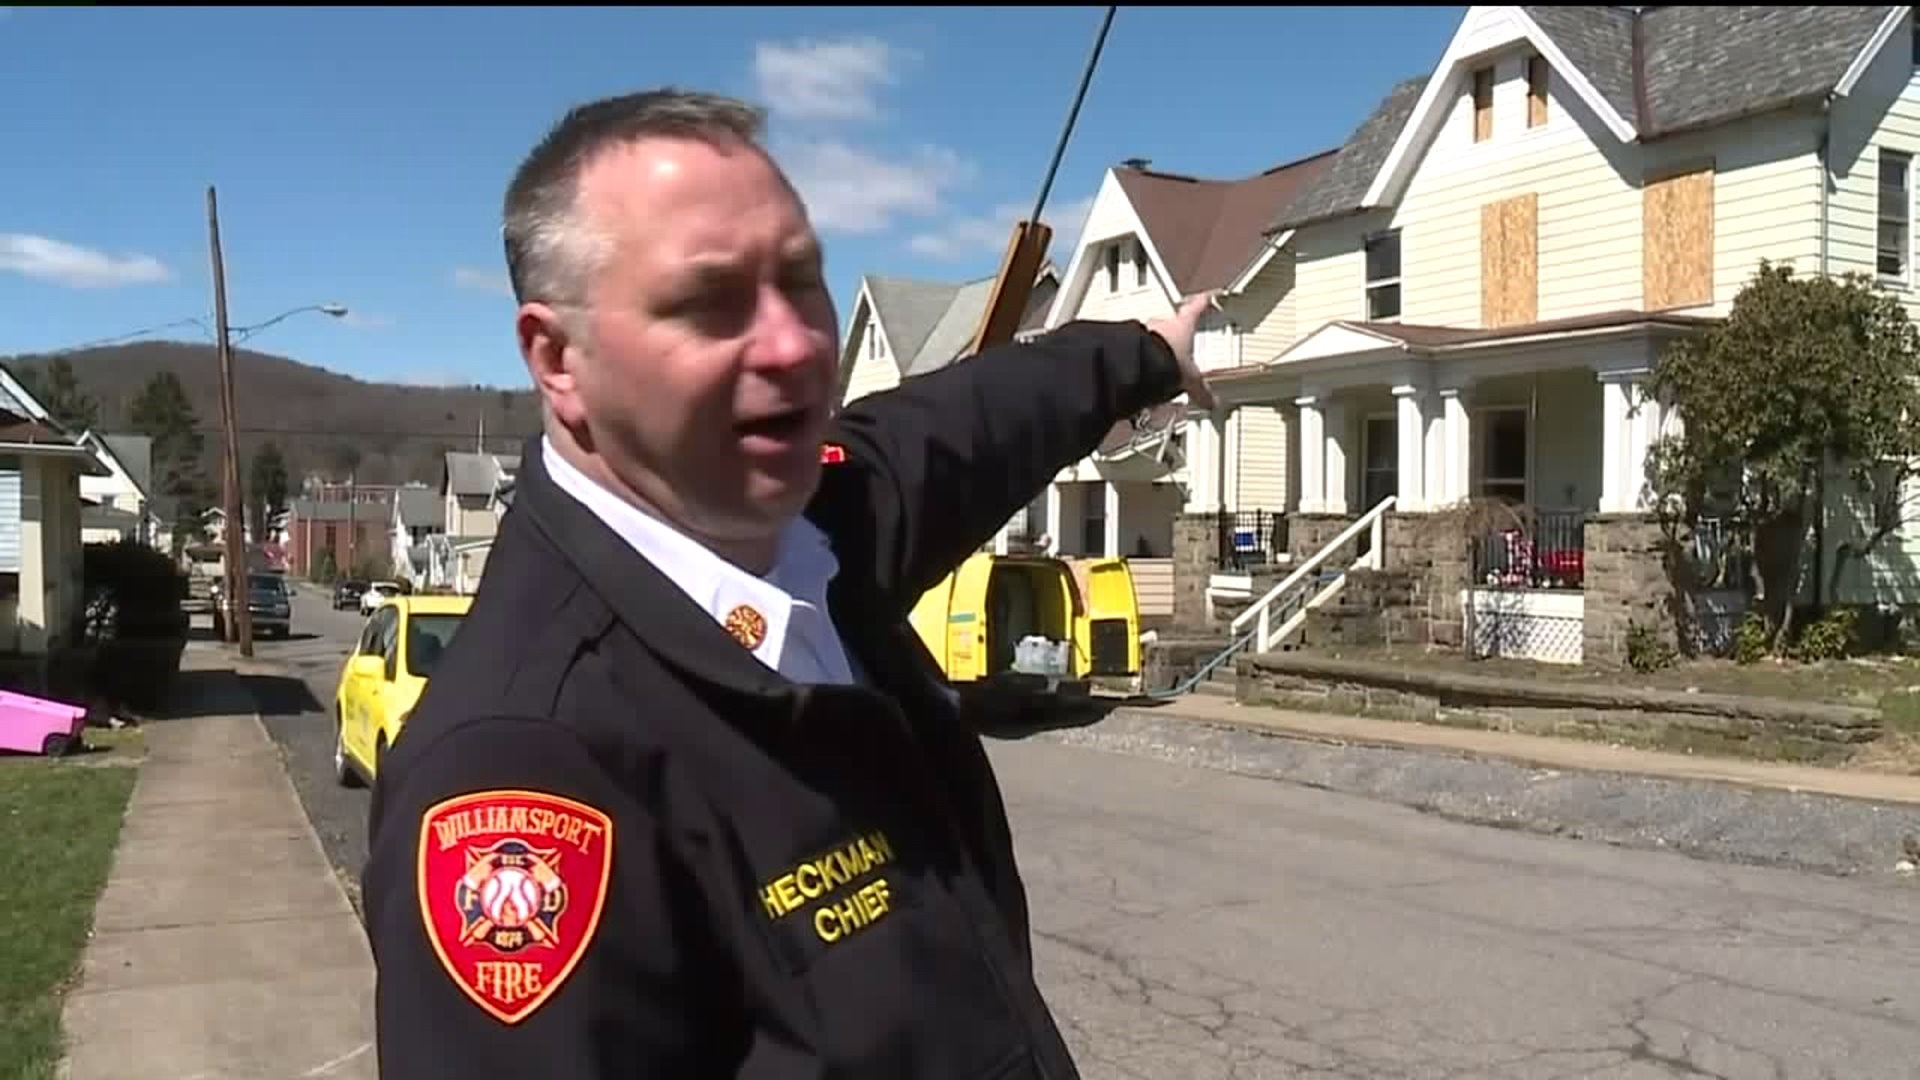 Off-duty Fire Chief Helps Save Woman from Burning Building